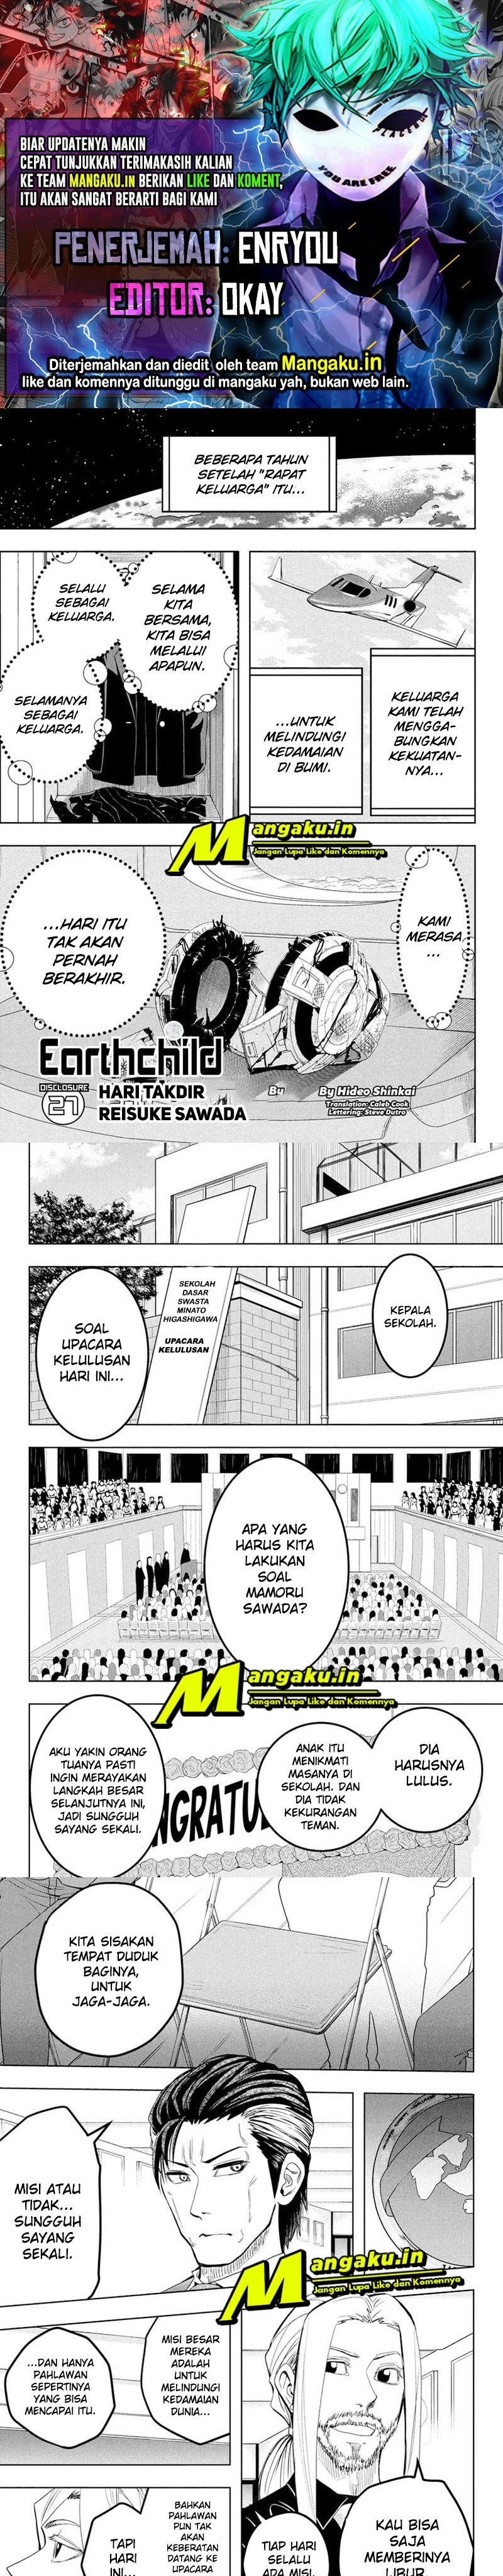 Earthchild Chapter 27 End